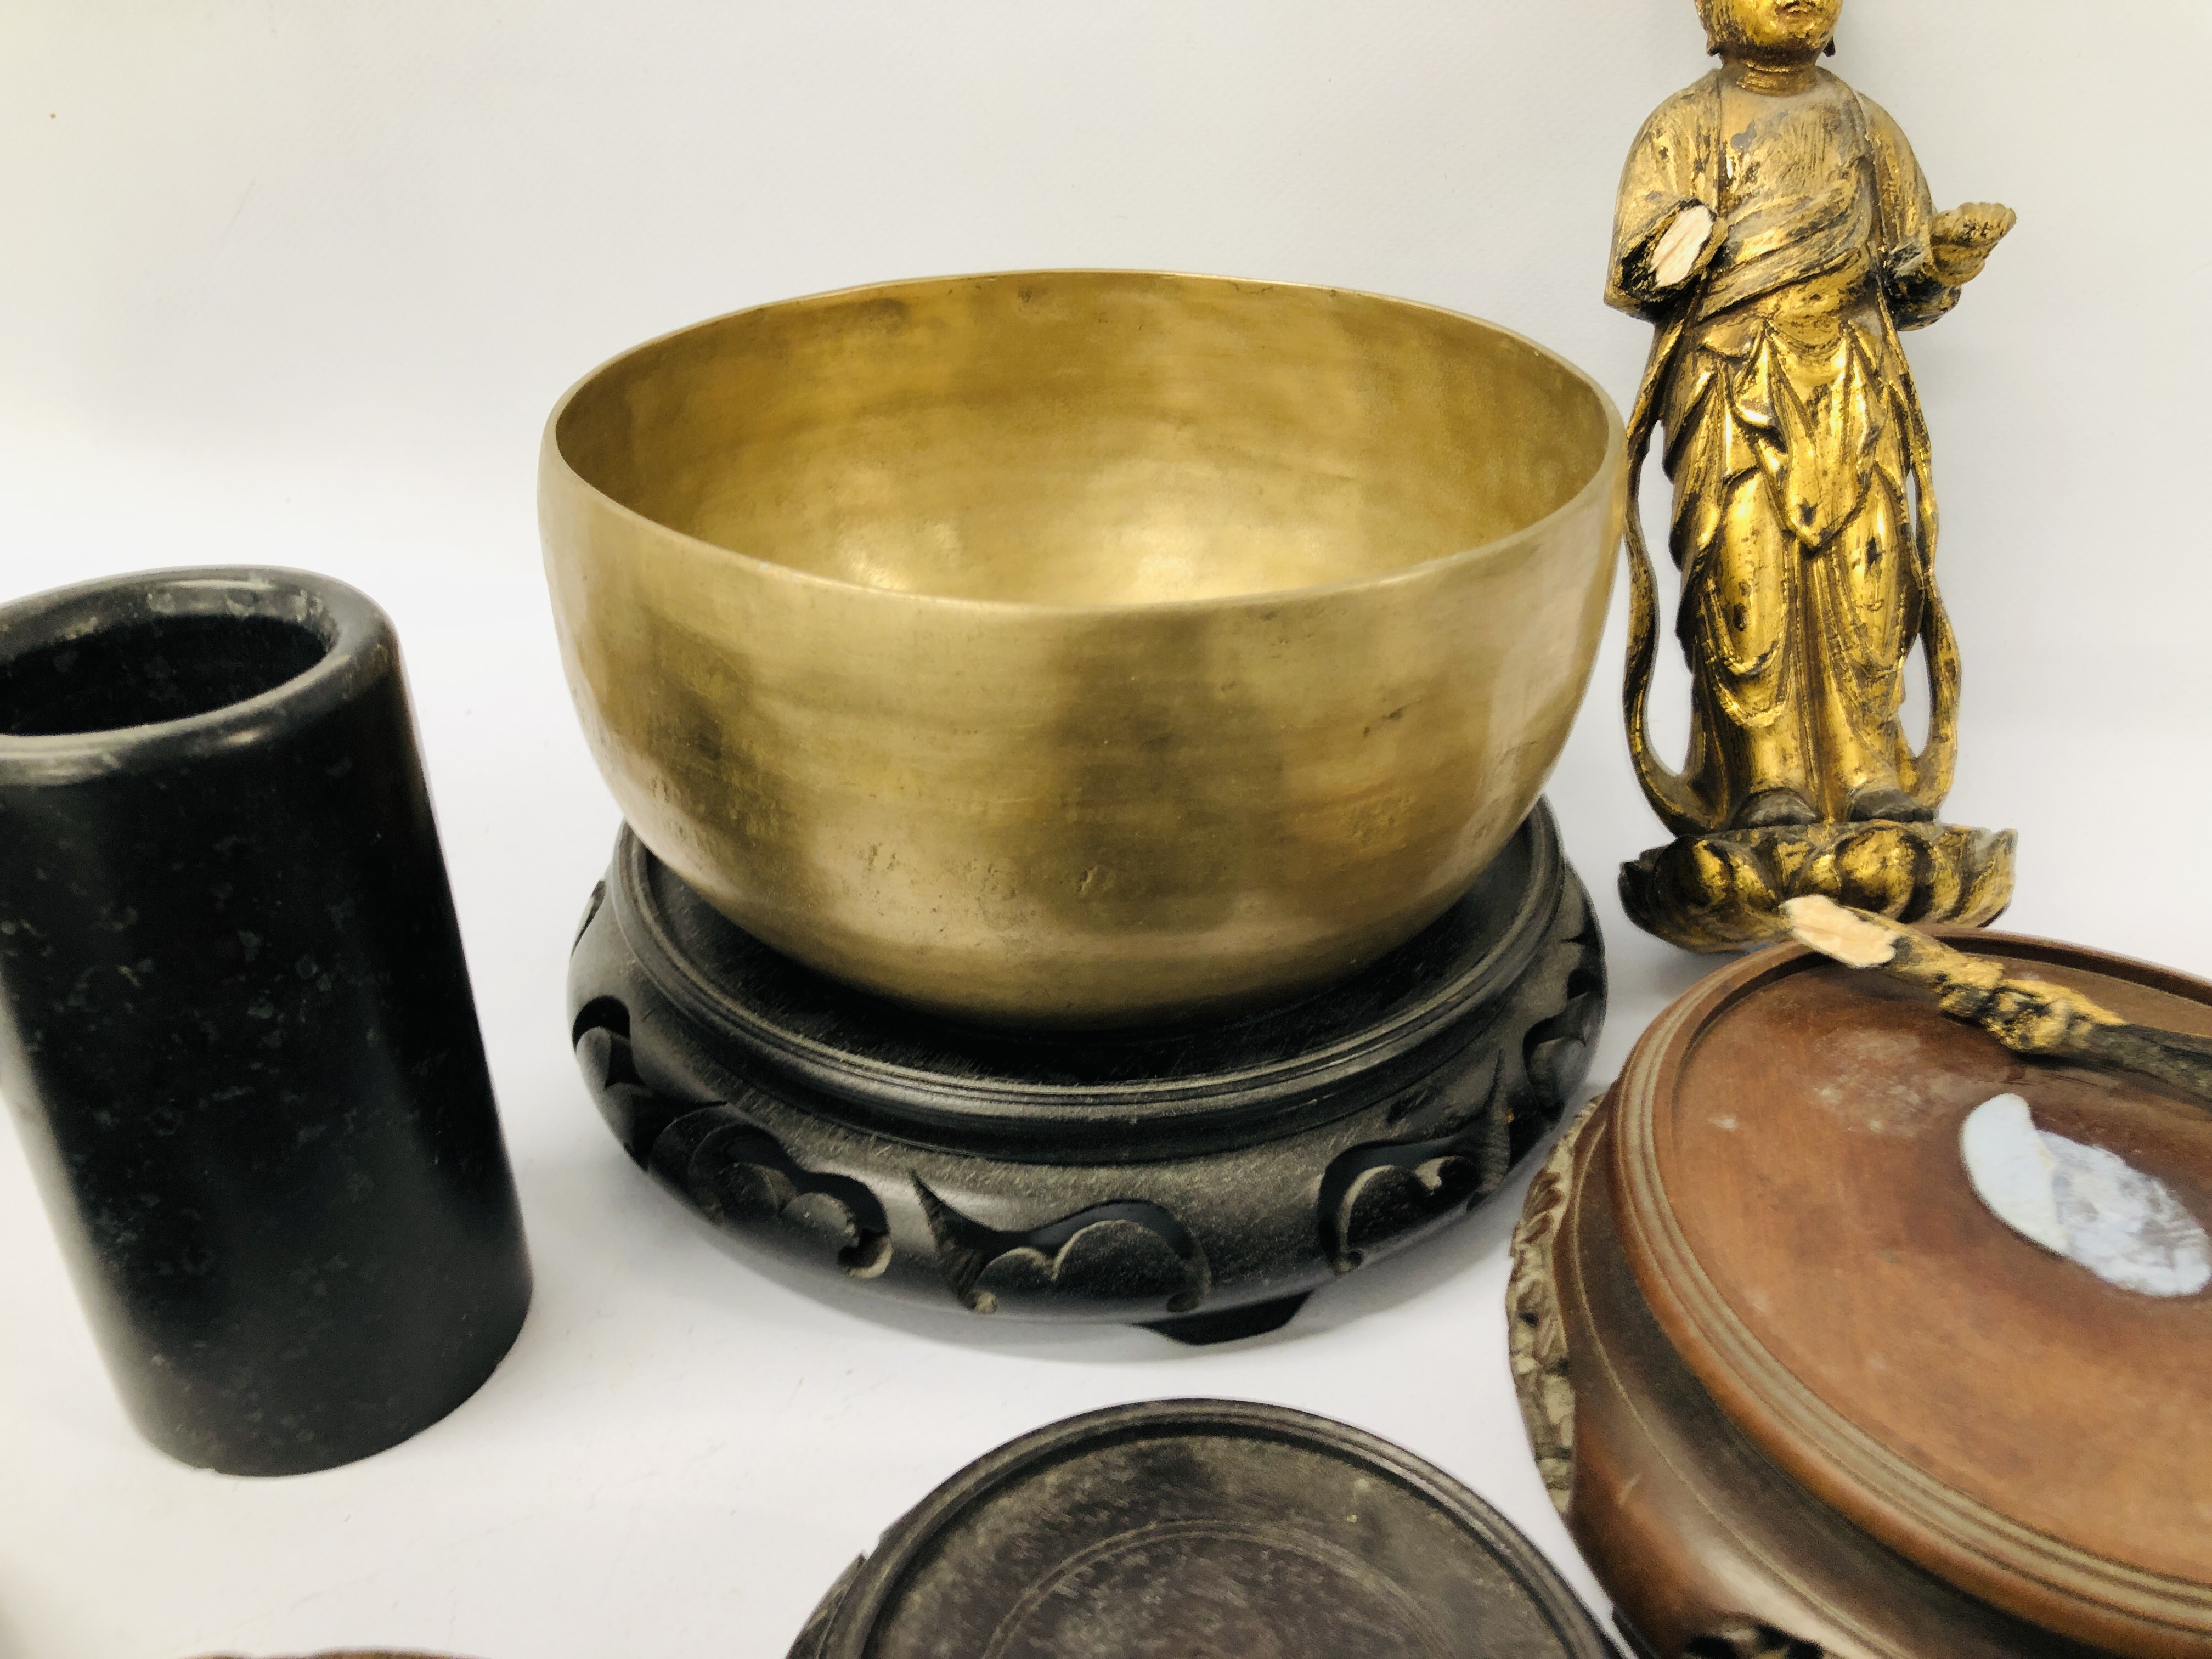 9 X ORIENTAL HARDWOOD STANDS, CHAMBER STICK, INDIAN GILT FINISH CARVING, METAL BOWL ETC. - Image 9 of 13